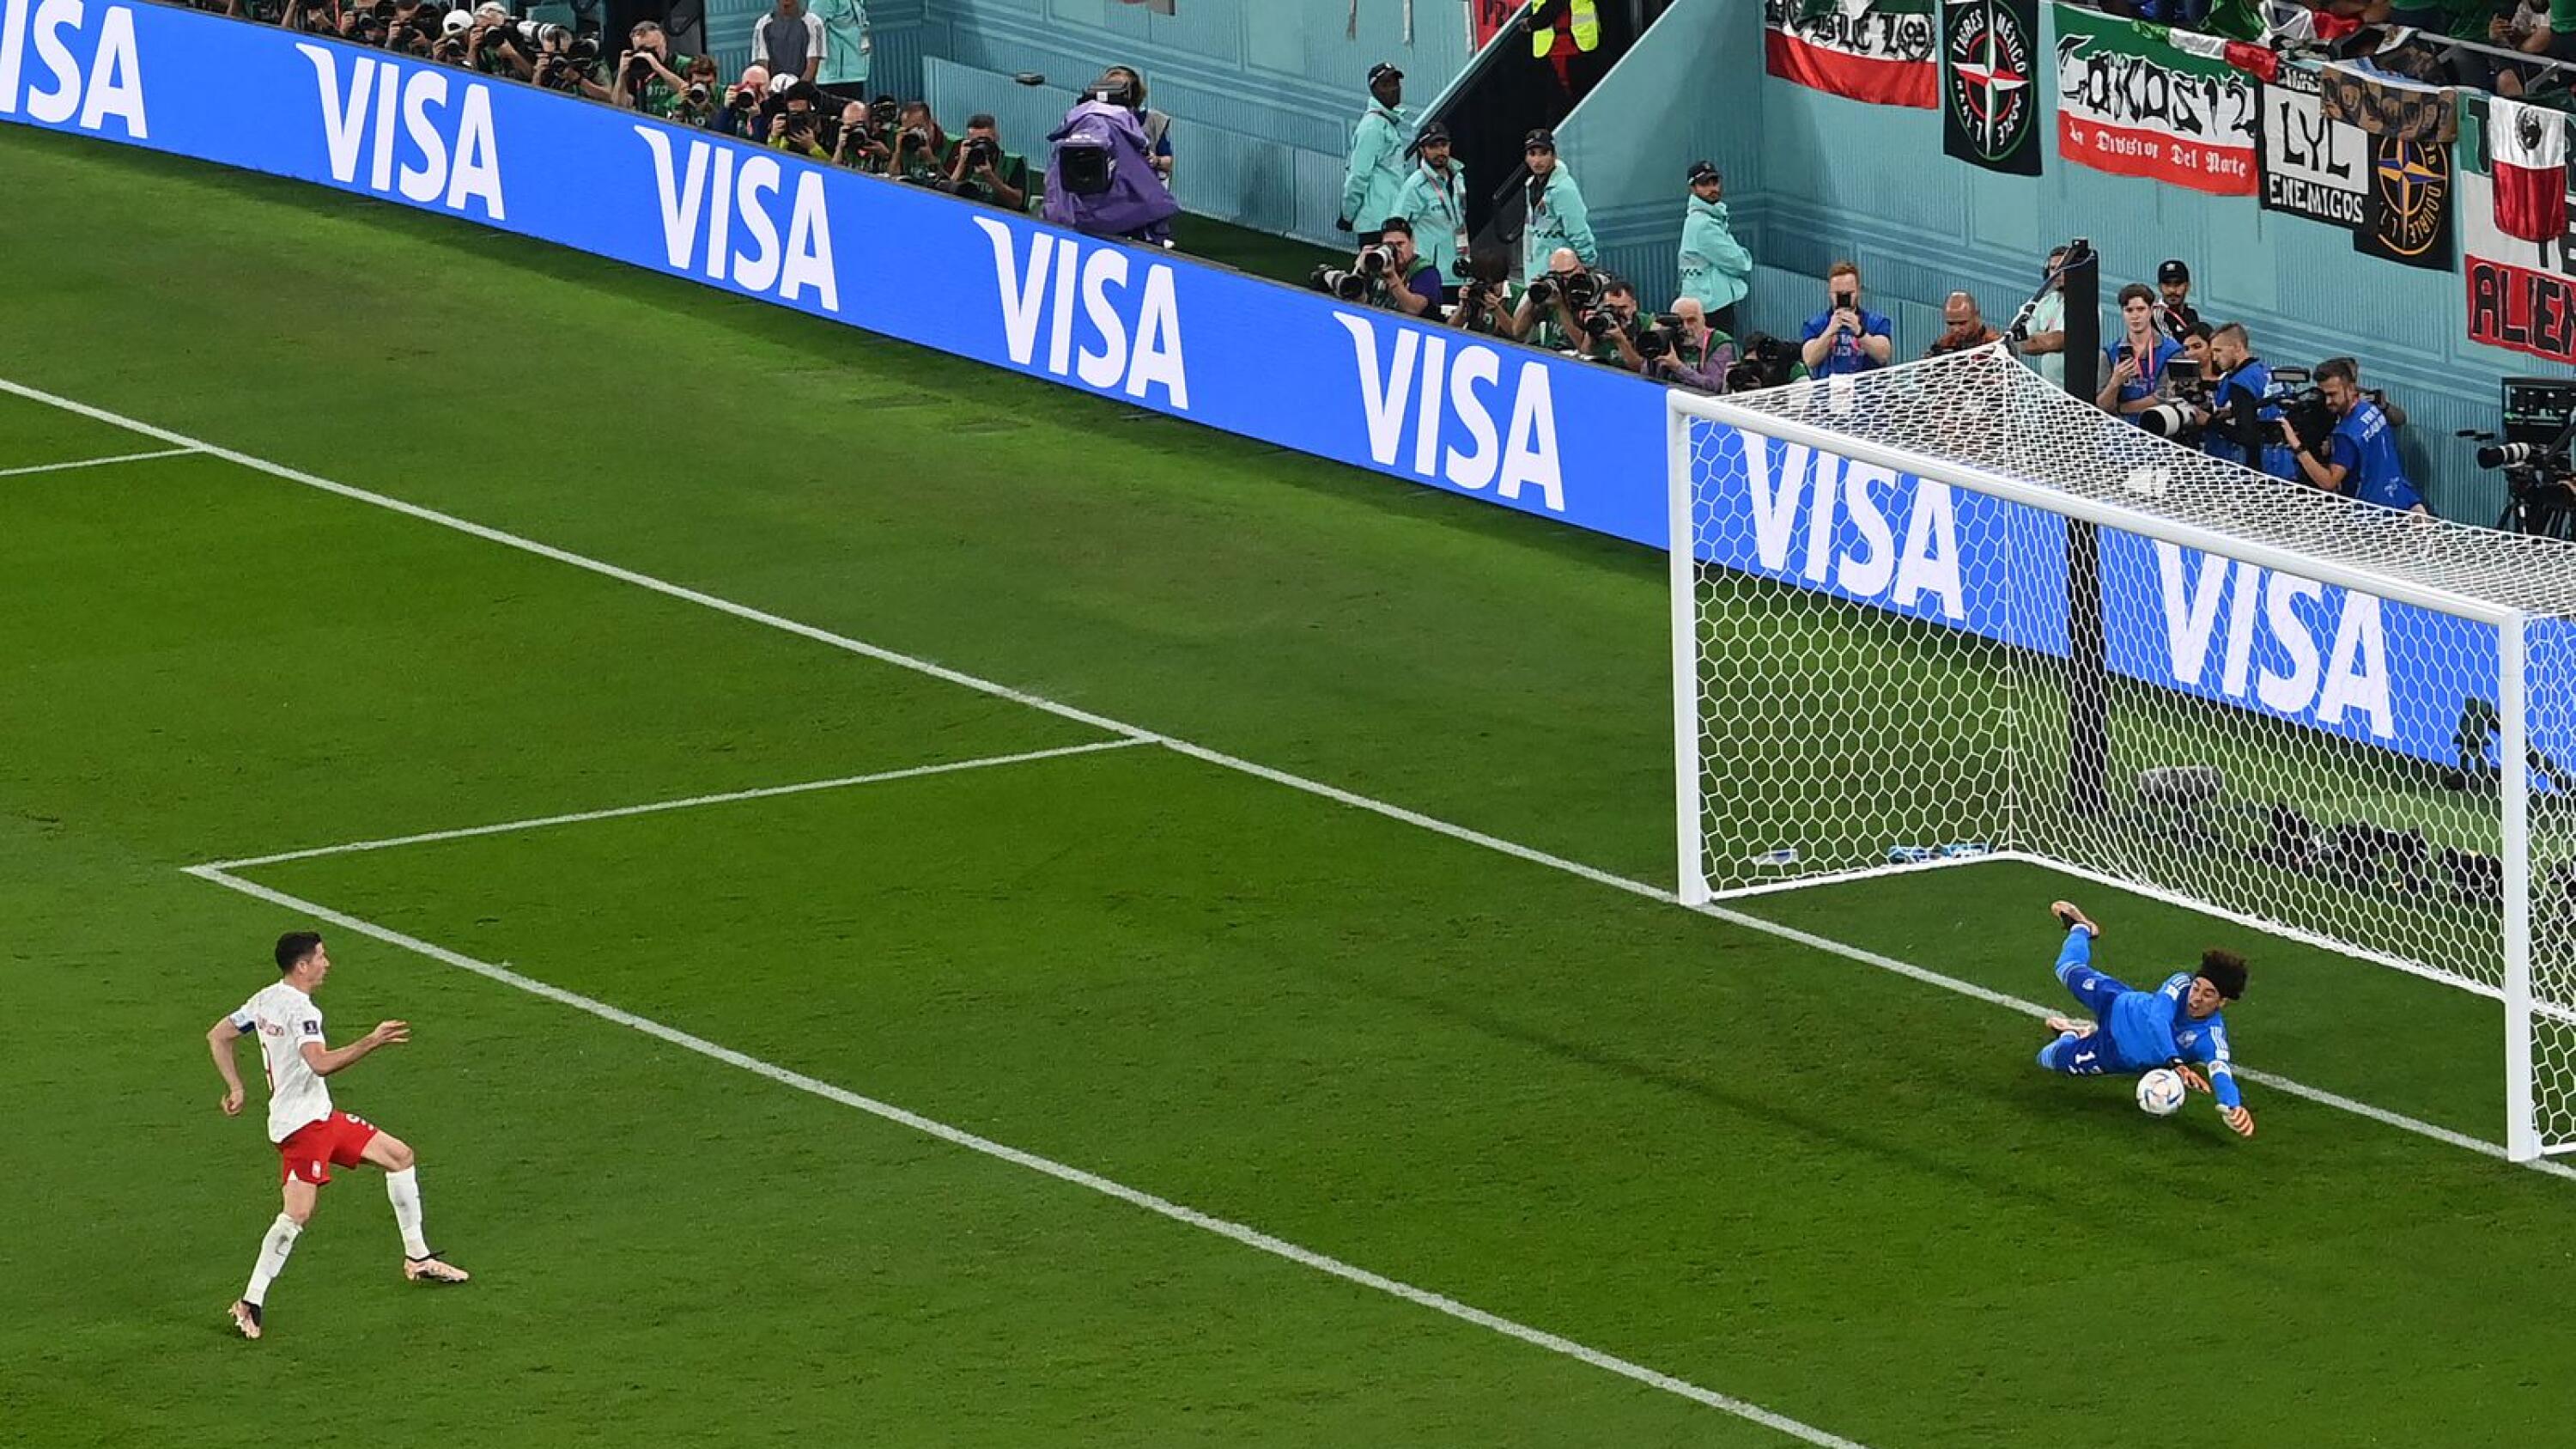 Mexico's Guillermo Ochoa saves a penalty kick by Poland's Robert Lewandowski during their Qatar 2022 World Cup Group C football match at Stadium 974 in Doha on Tuesday